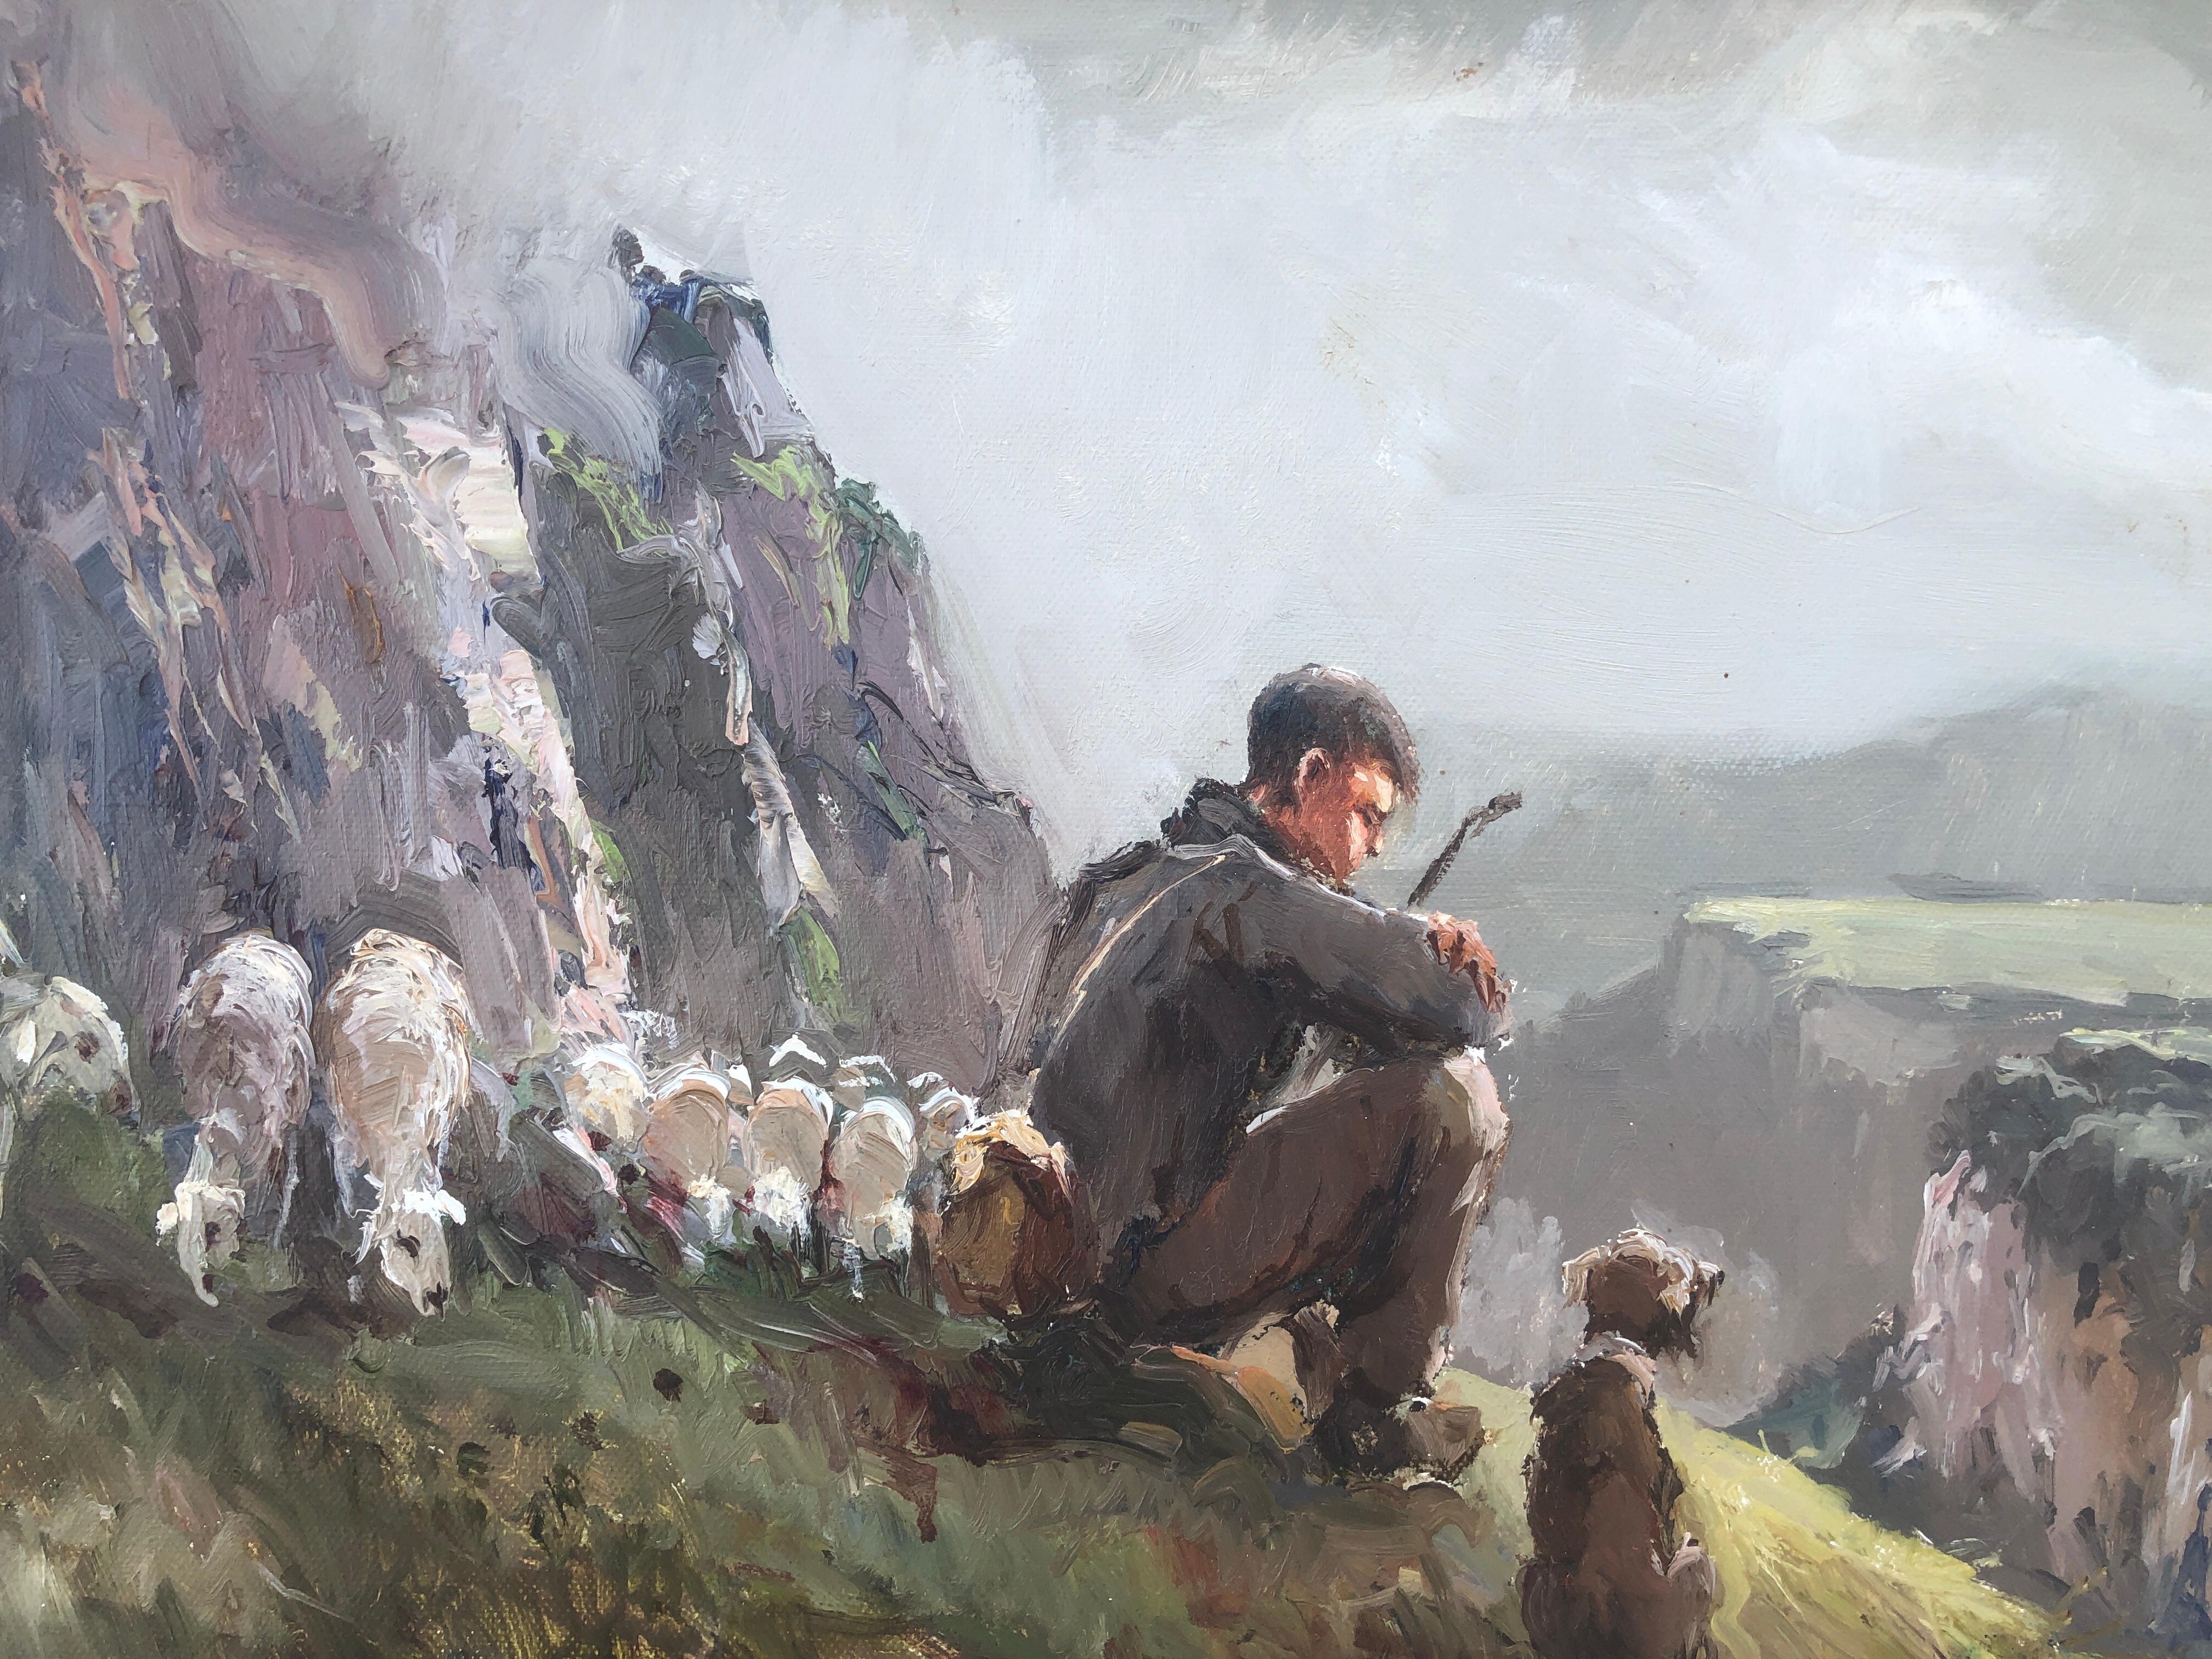 Josep Colomer Comas (1935-2003) - The sheep shepherd - Oil on canvas
Signed lower right
Oil measures 36x46 cm.
Frameless.

Josep Colomer was an important landscaper at the Olot School, a teacher of painters such as Hidalgo Portero or his son, Fermín